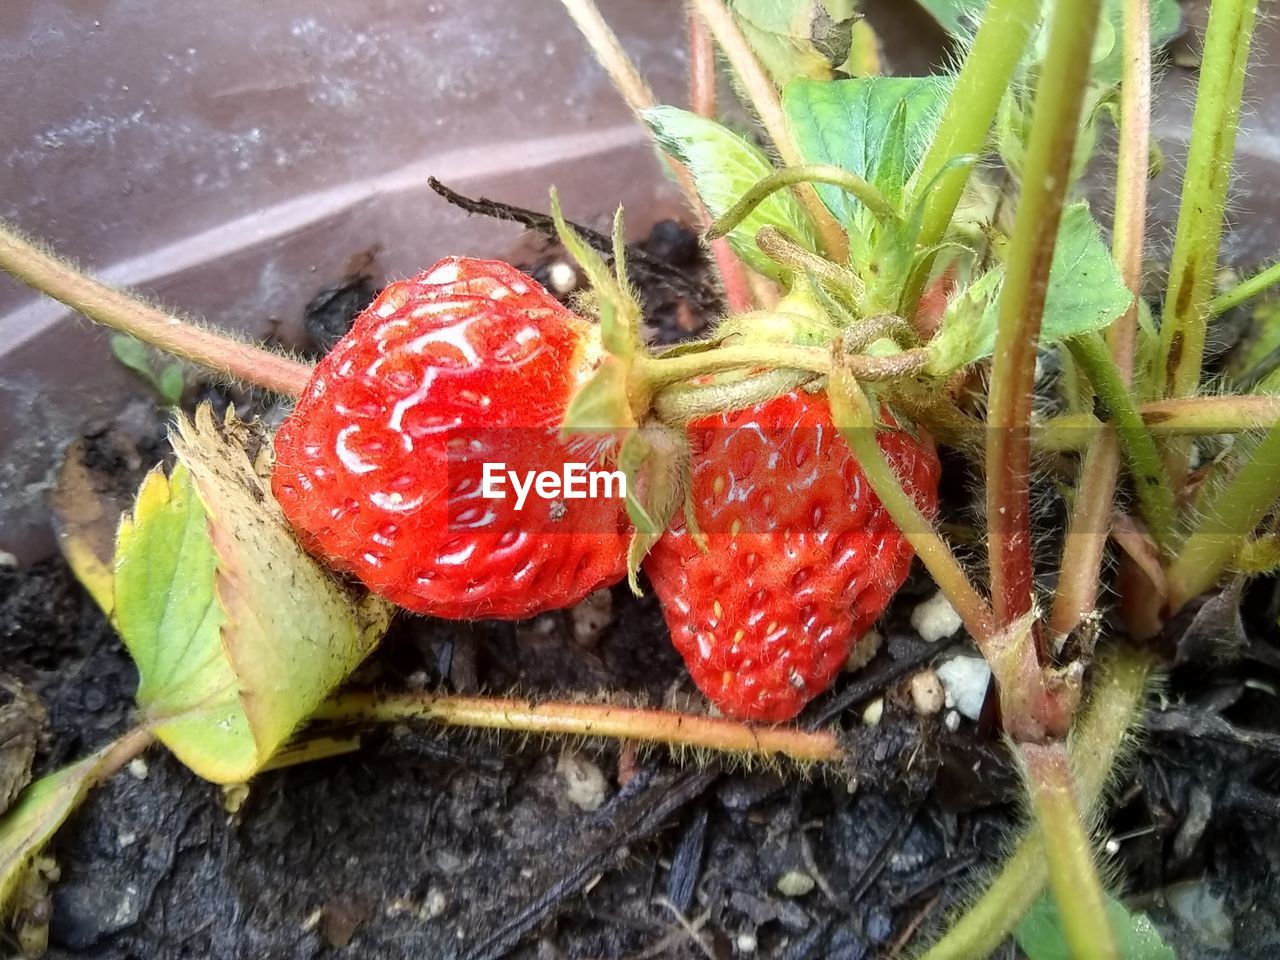 HIGH ANGLE VIEW OF STRAWBERRIES AND PLANT